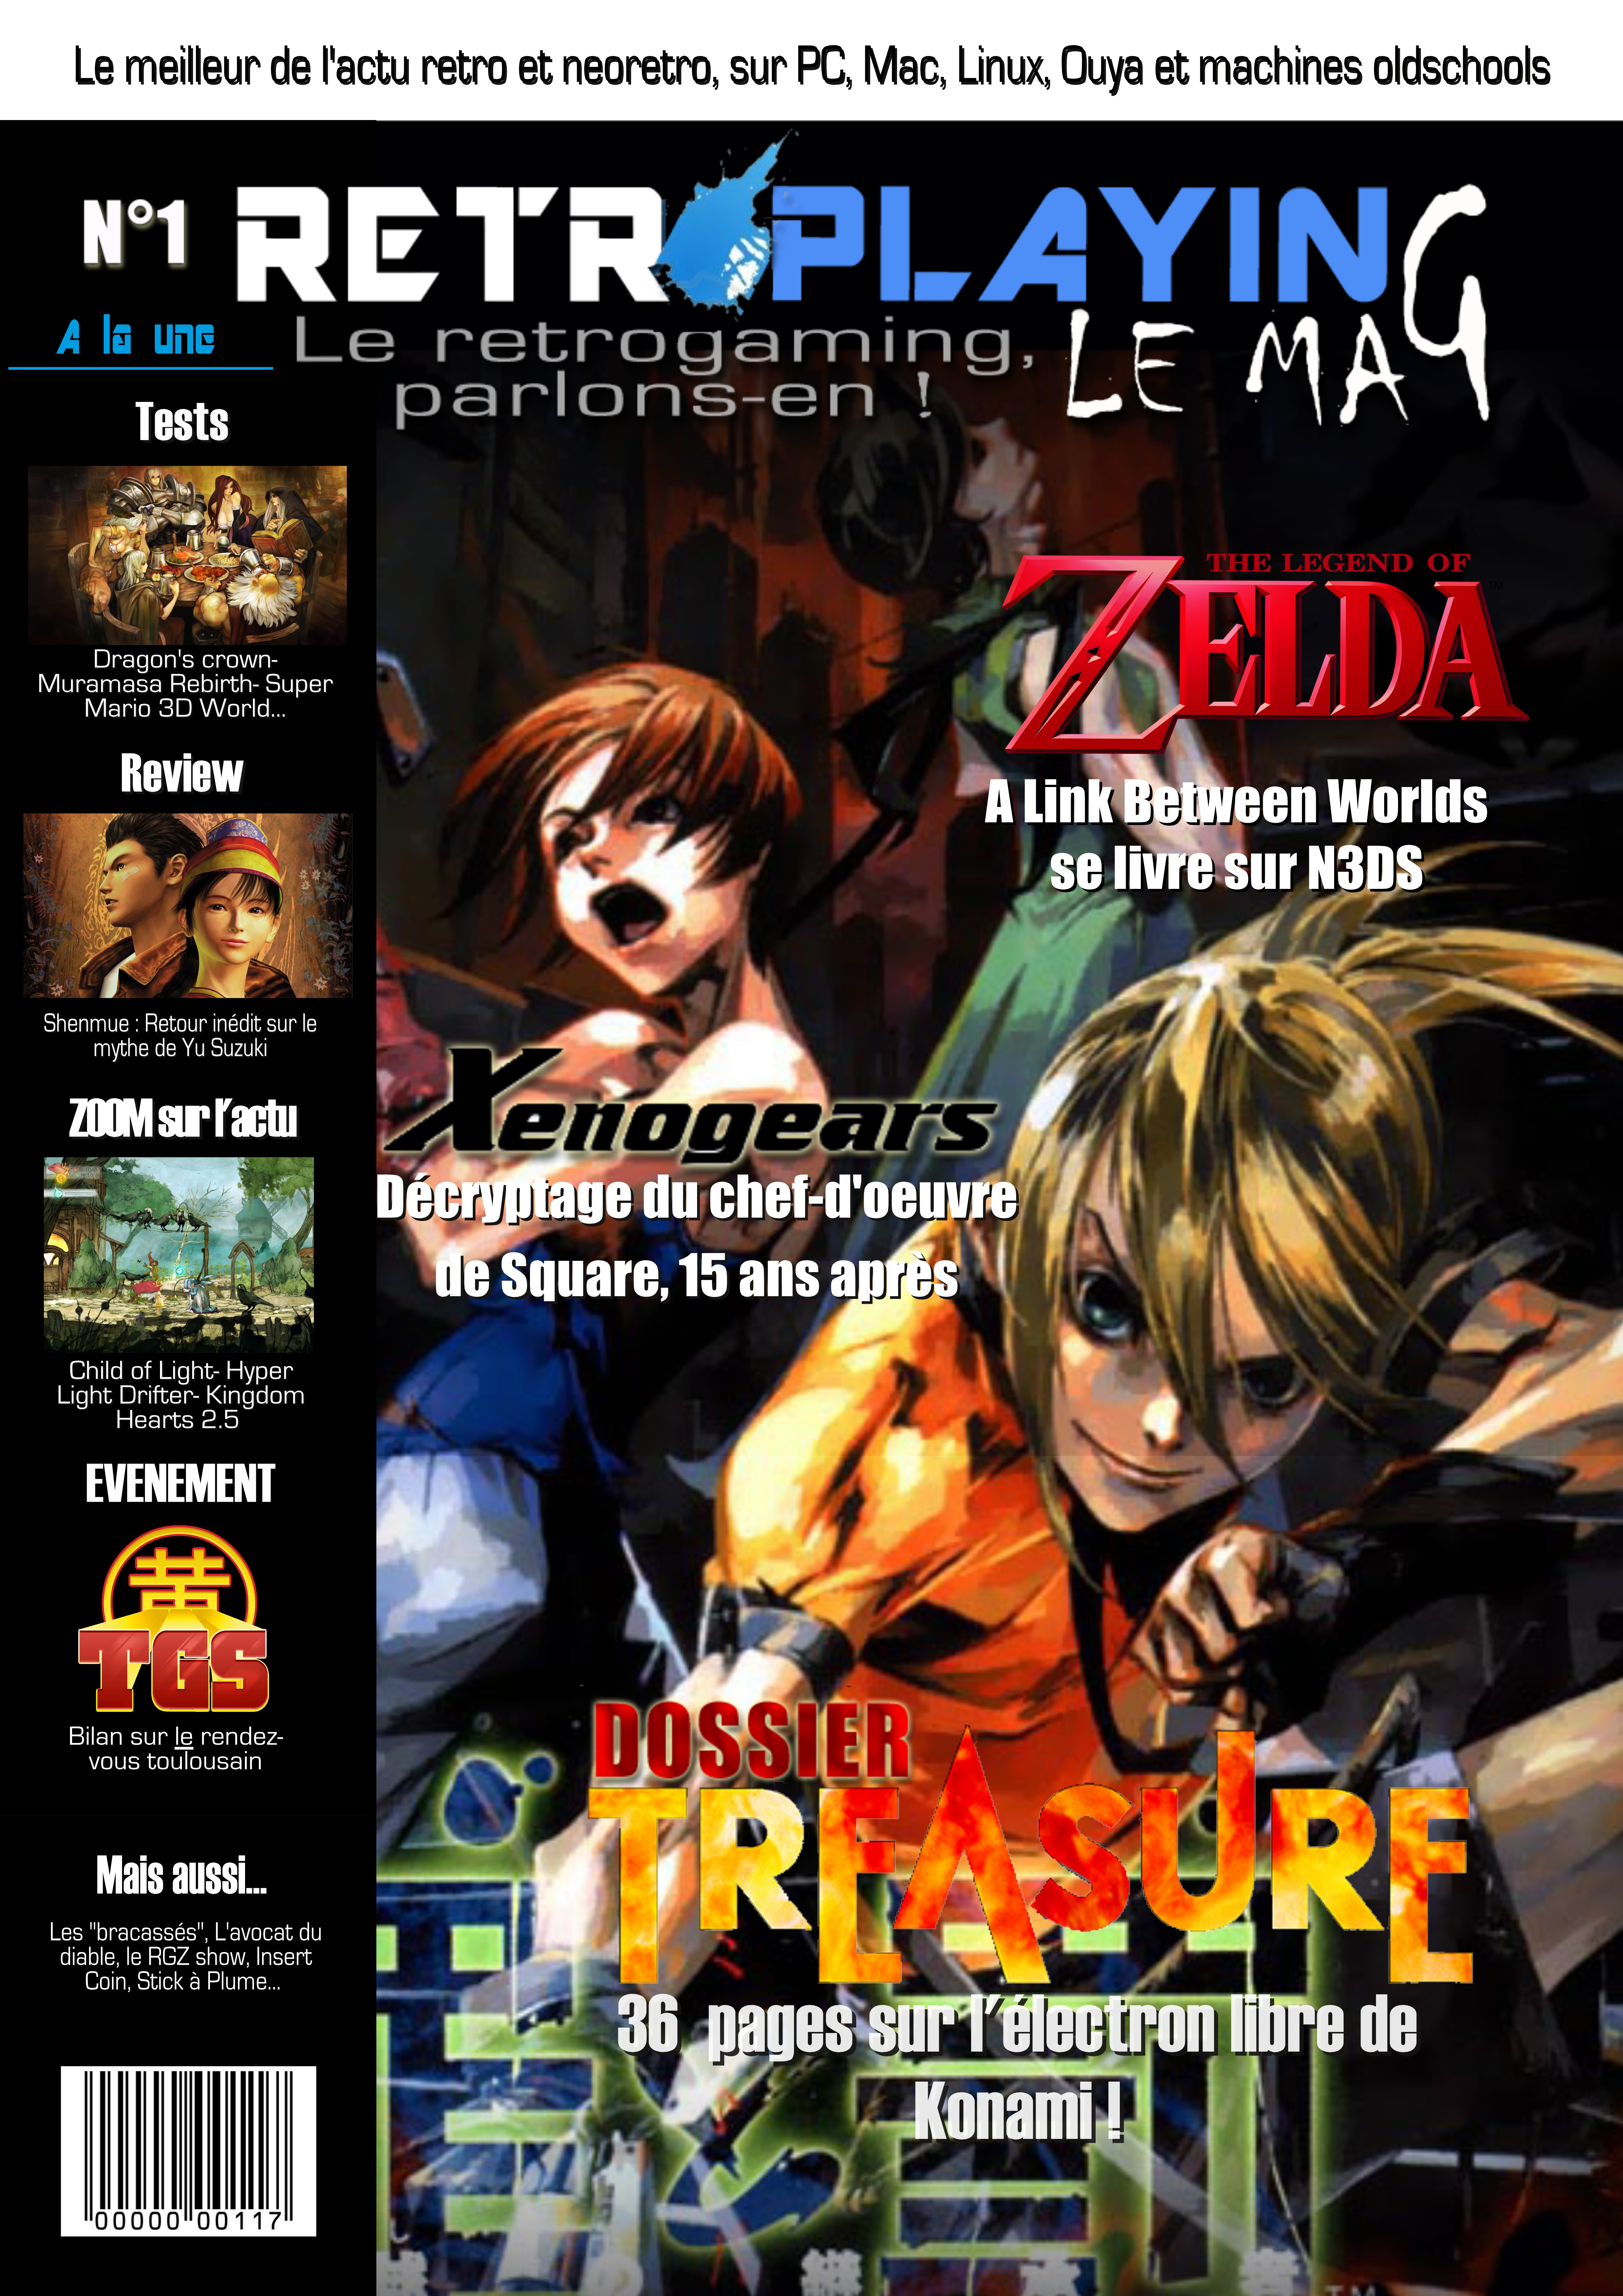 http://www.retro-playing.com/wp-content/uploads/2012/08/Couv-Bis-page001.jpeg